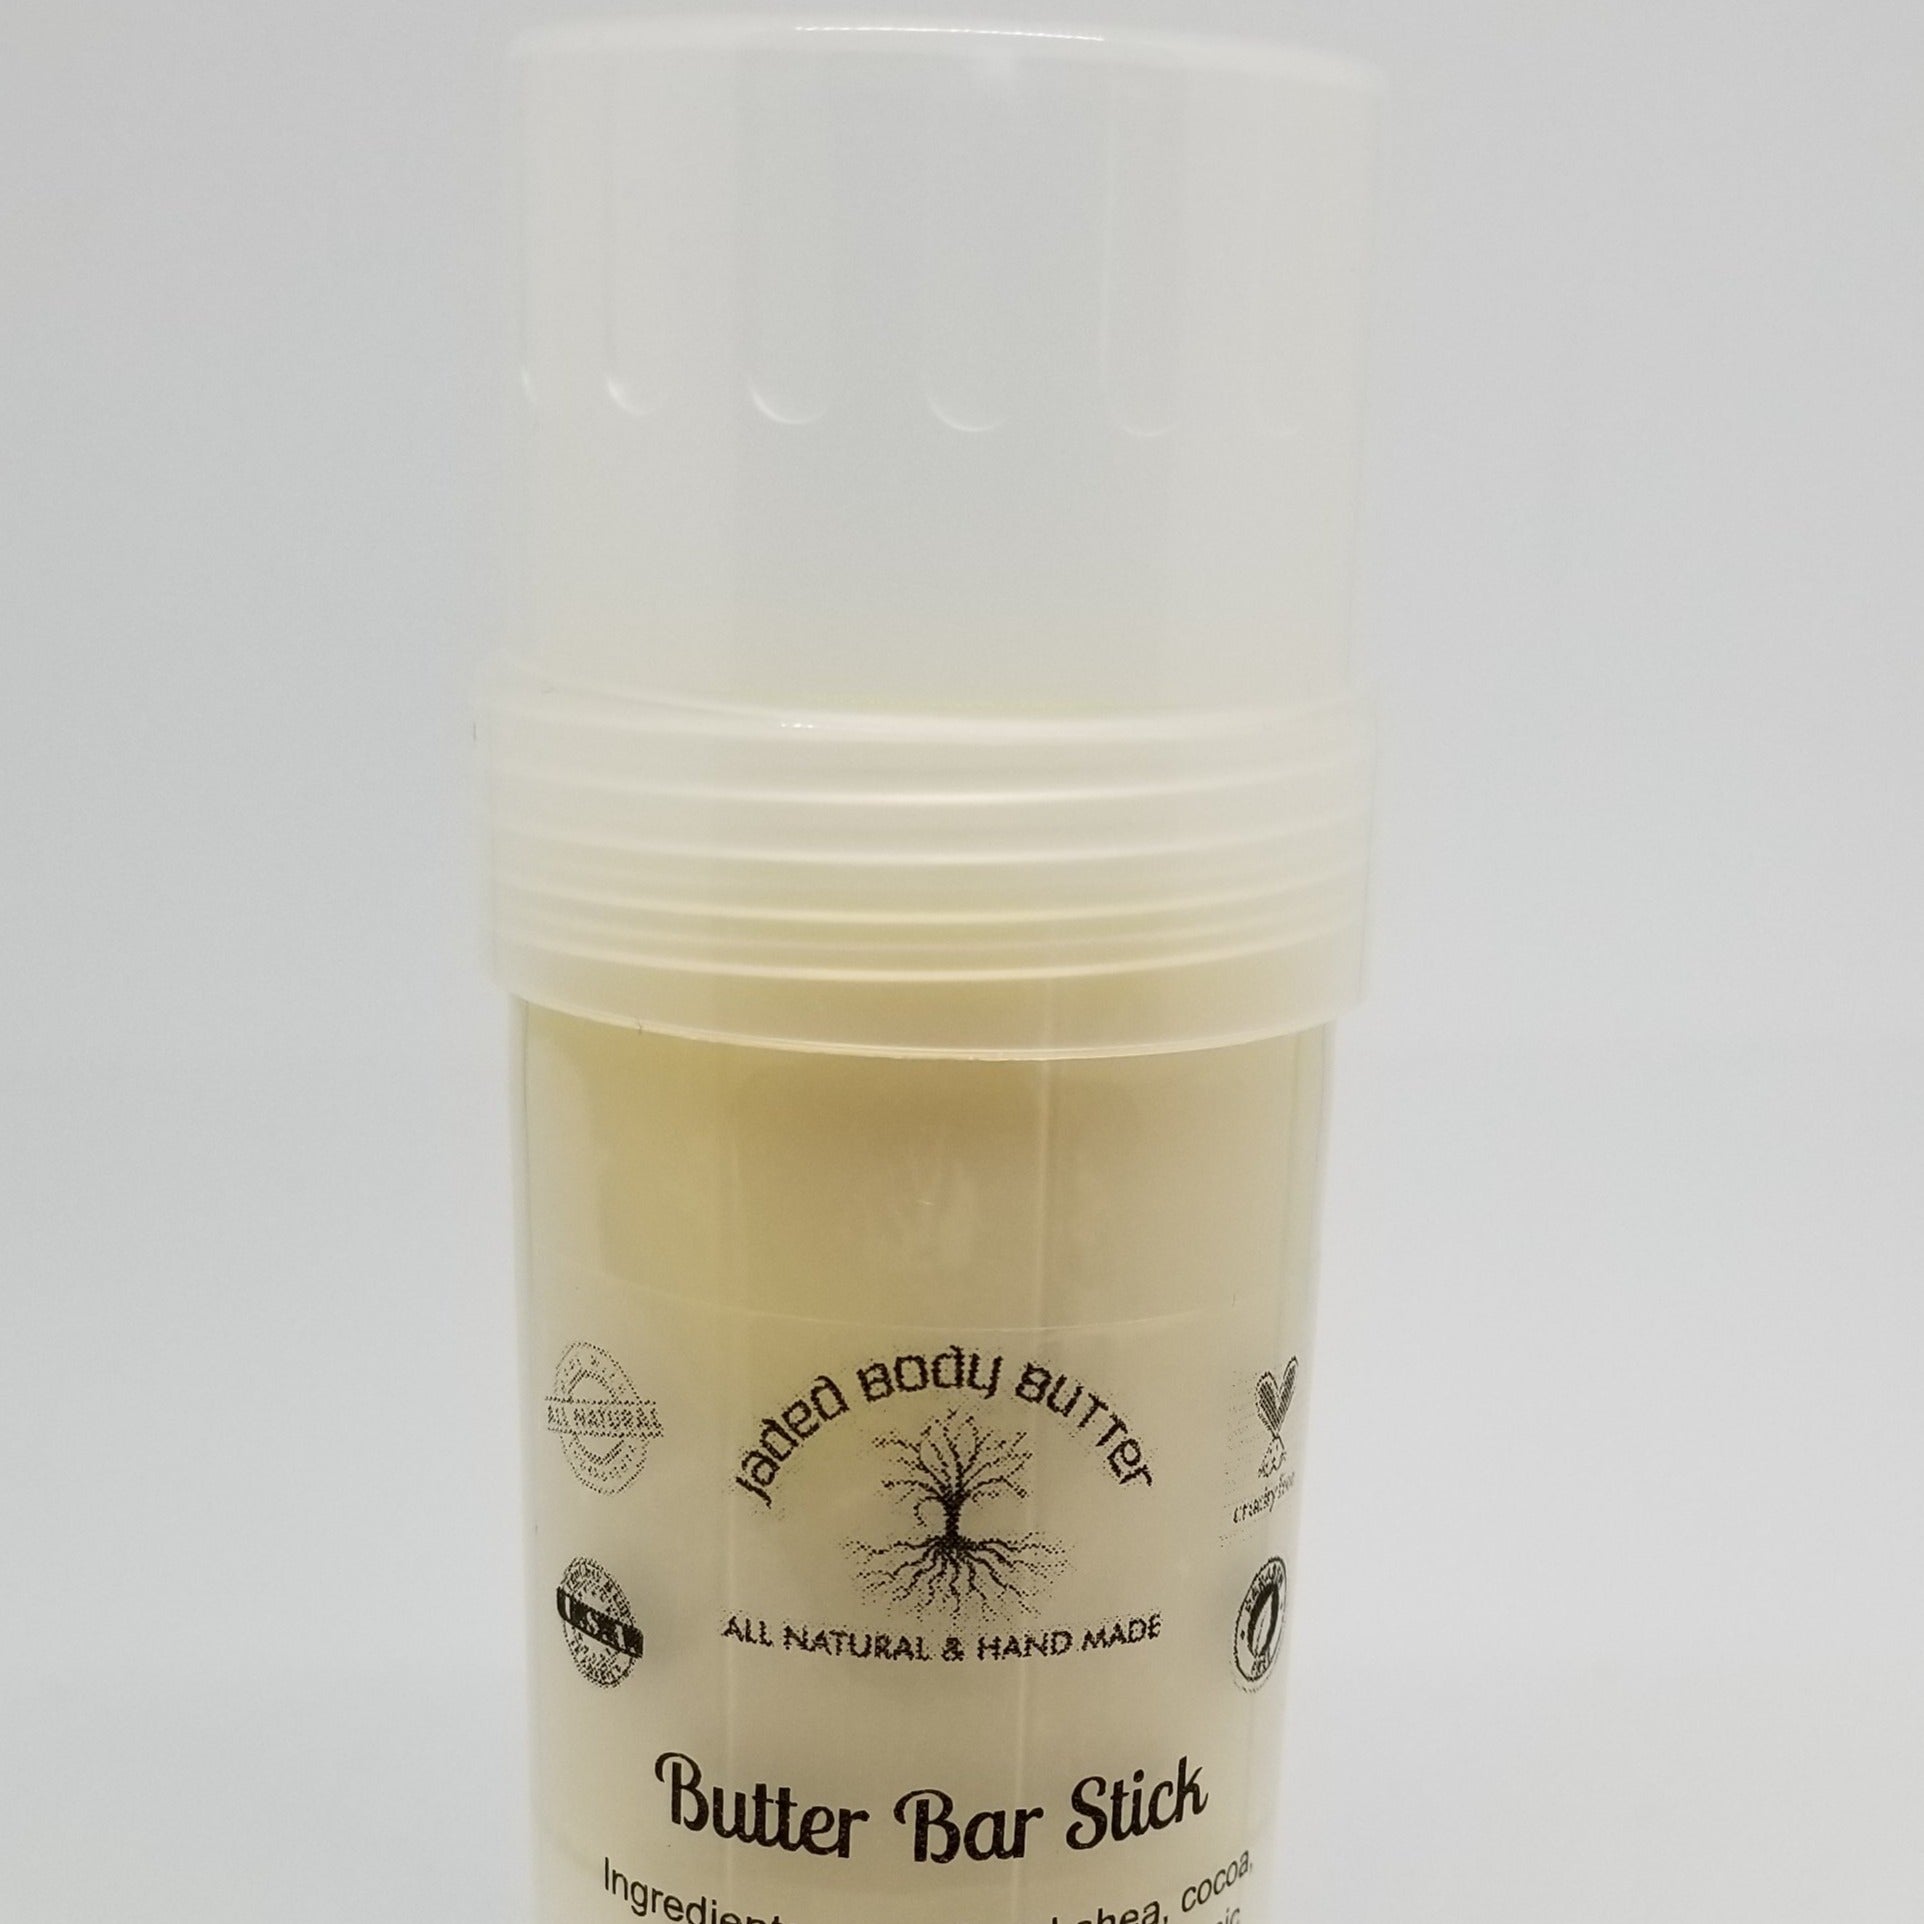 PRIVATE LABEL, 2.2 OZ Butter Bar Stick, Lotion stick, Butter stick  moisturizer, Skin moisturizer, Scents for Men and Women